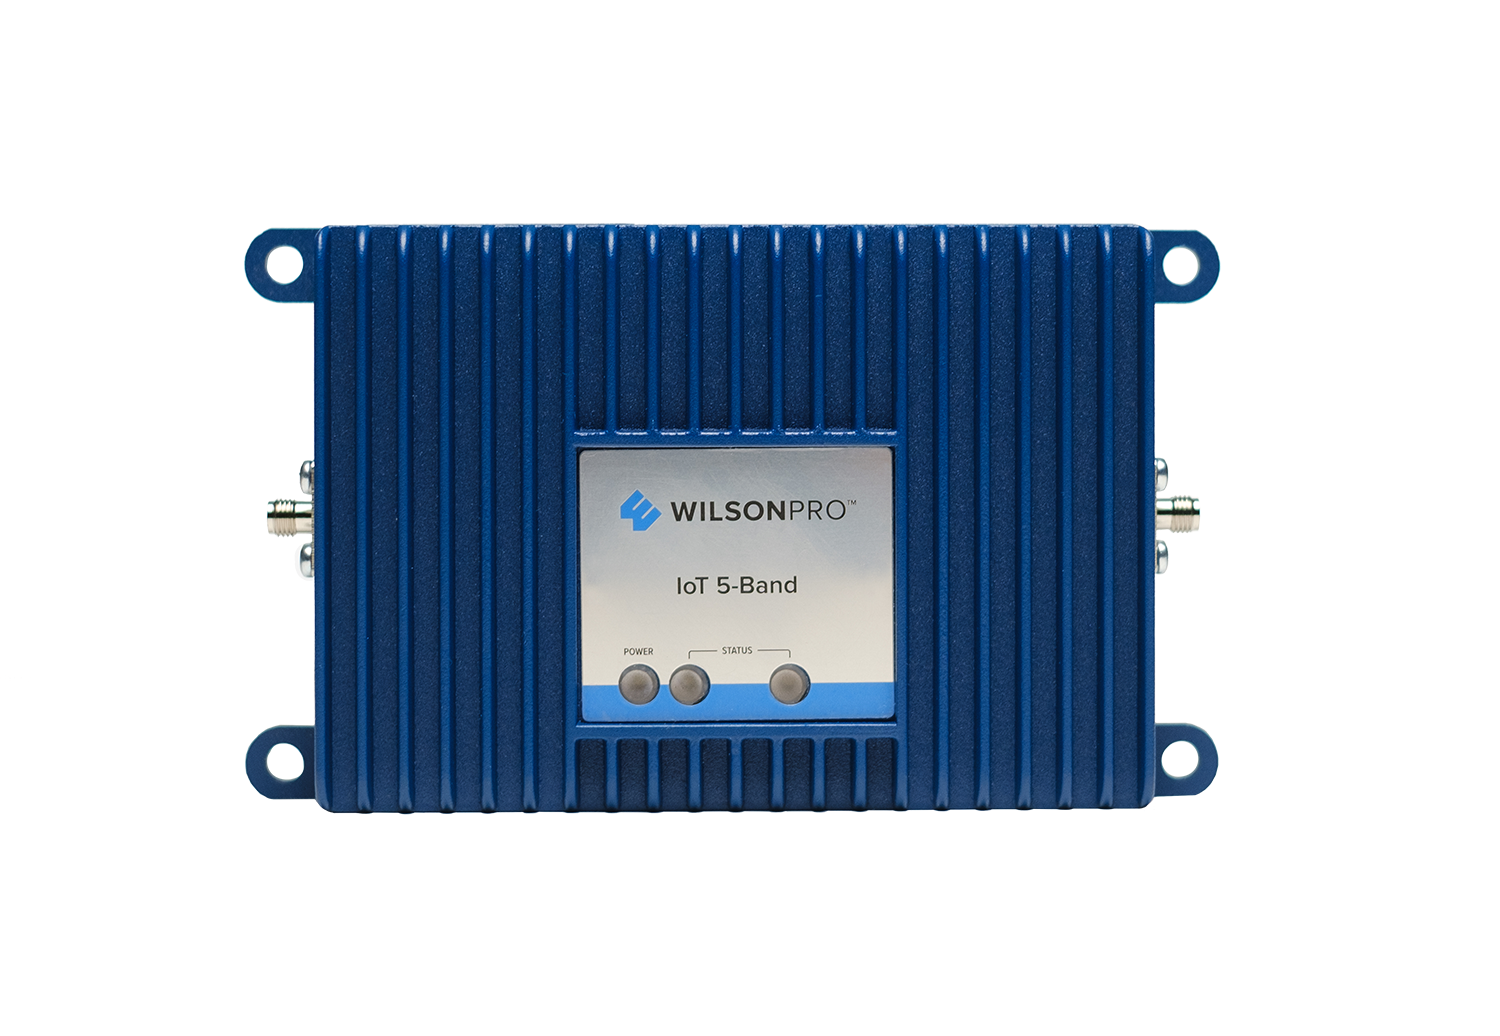 cellular repeaters for IoT devices - WilsonPro